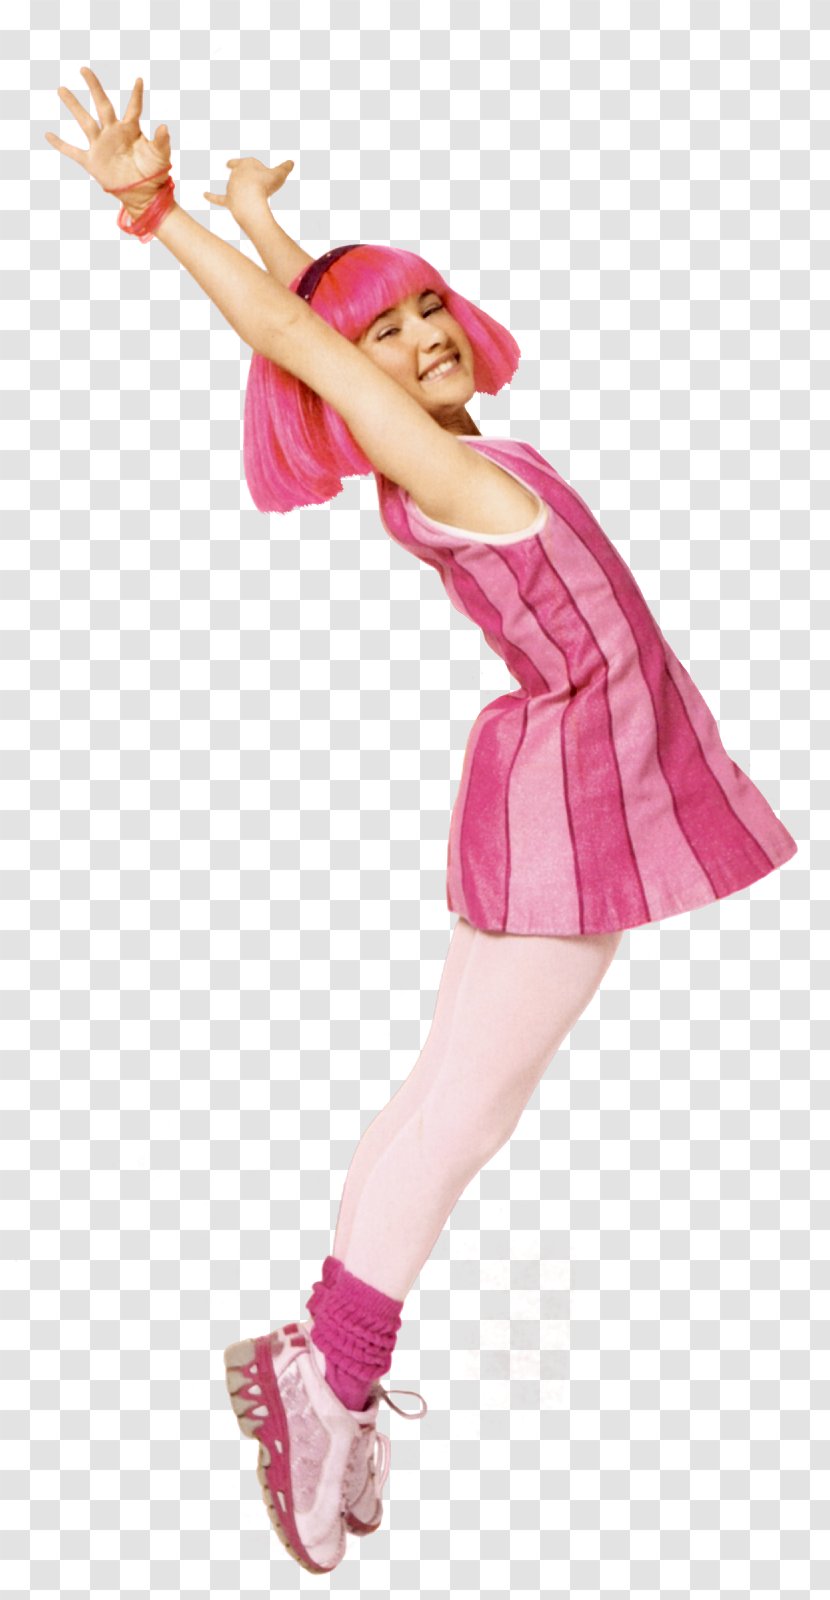 Julianna Rose Mauriello Stephanie LazyTown Sportacus Robbie Rotten - Lazy Town Shoes Transparent PNG